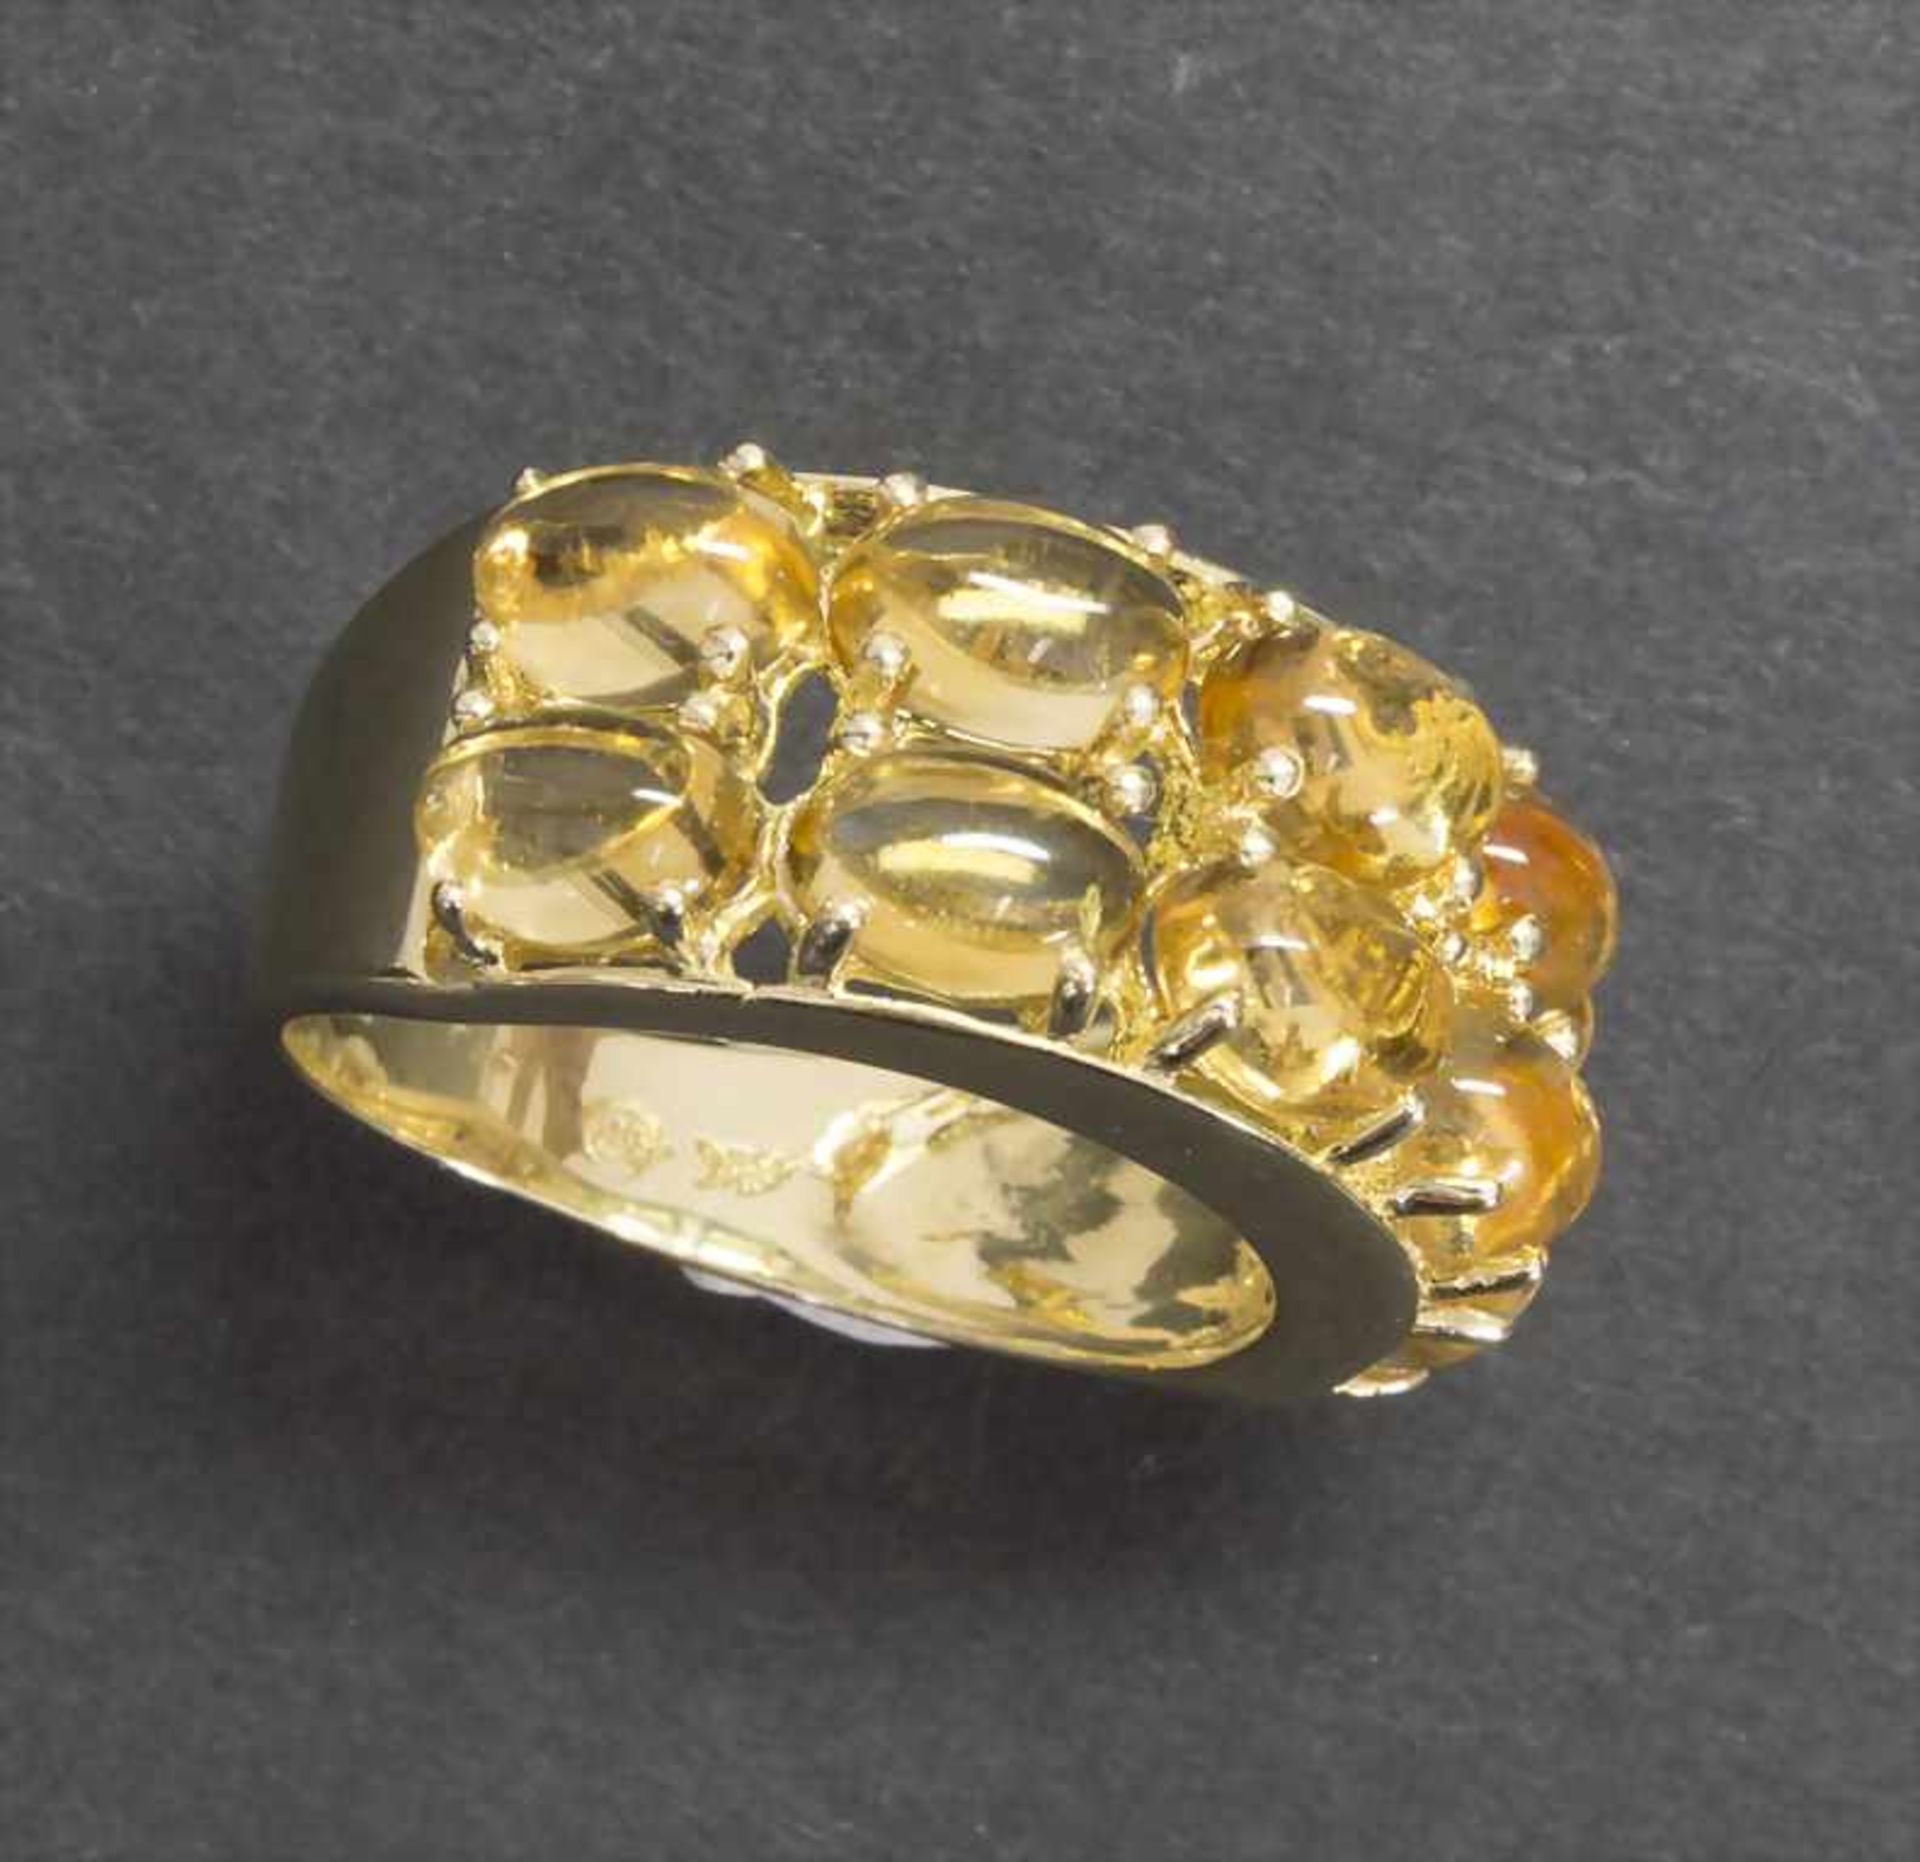 Damenring mit Citrin / A ladies ring with citrine - Image 3 of 3